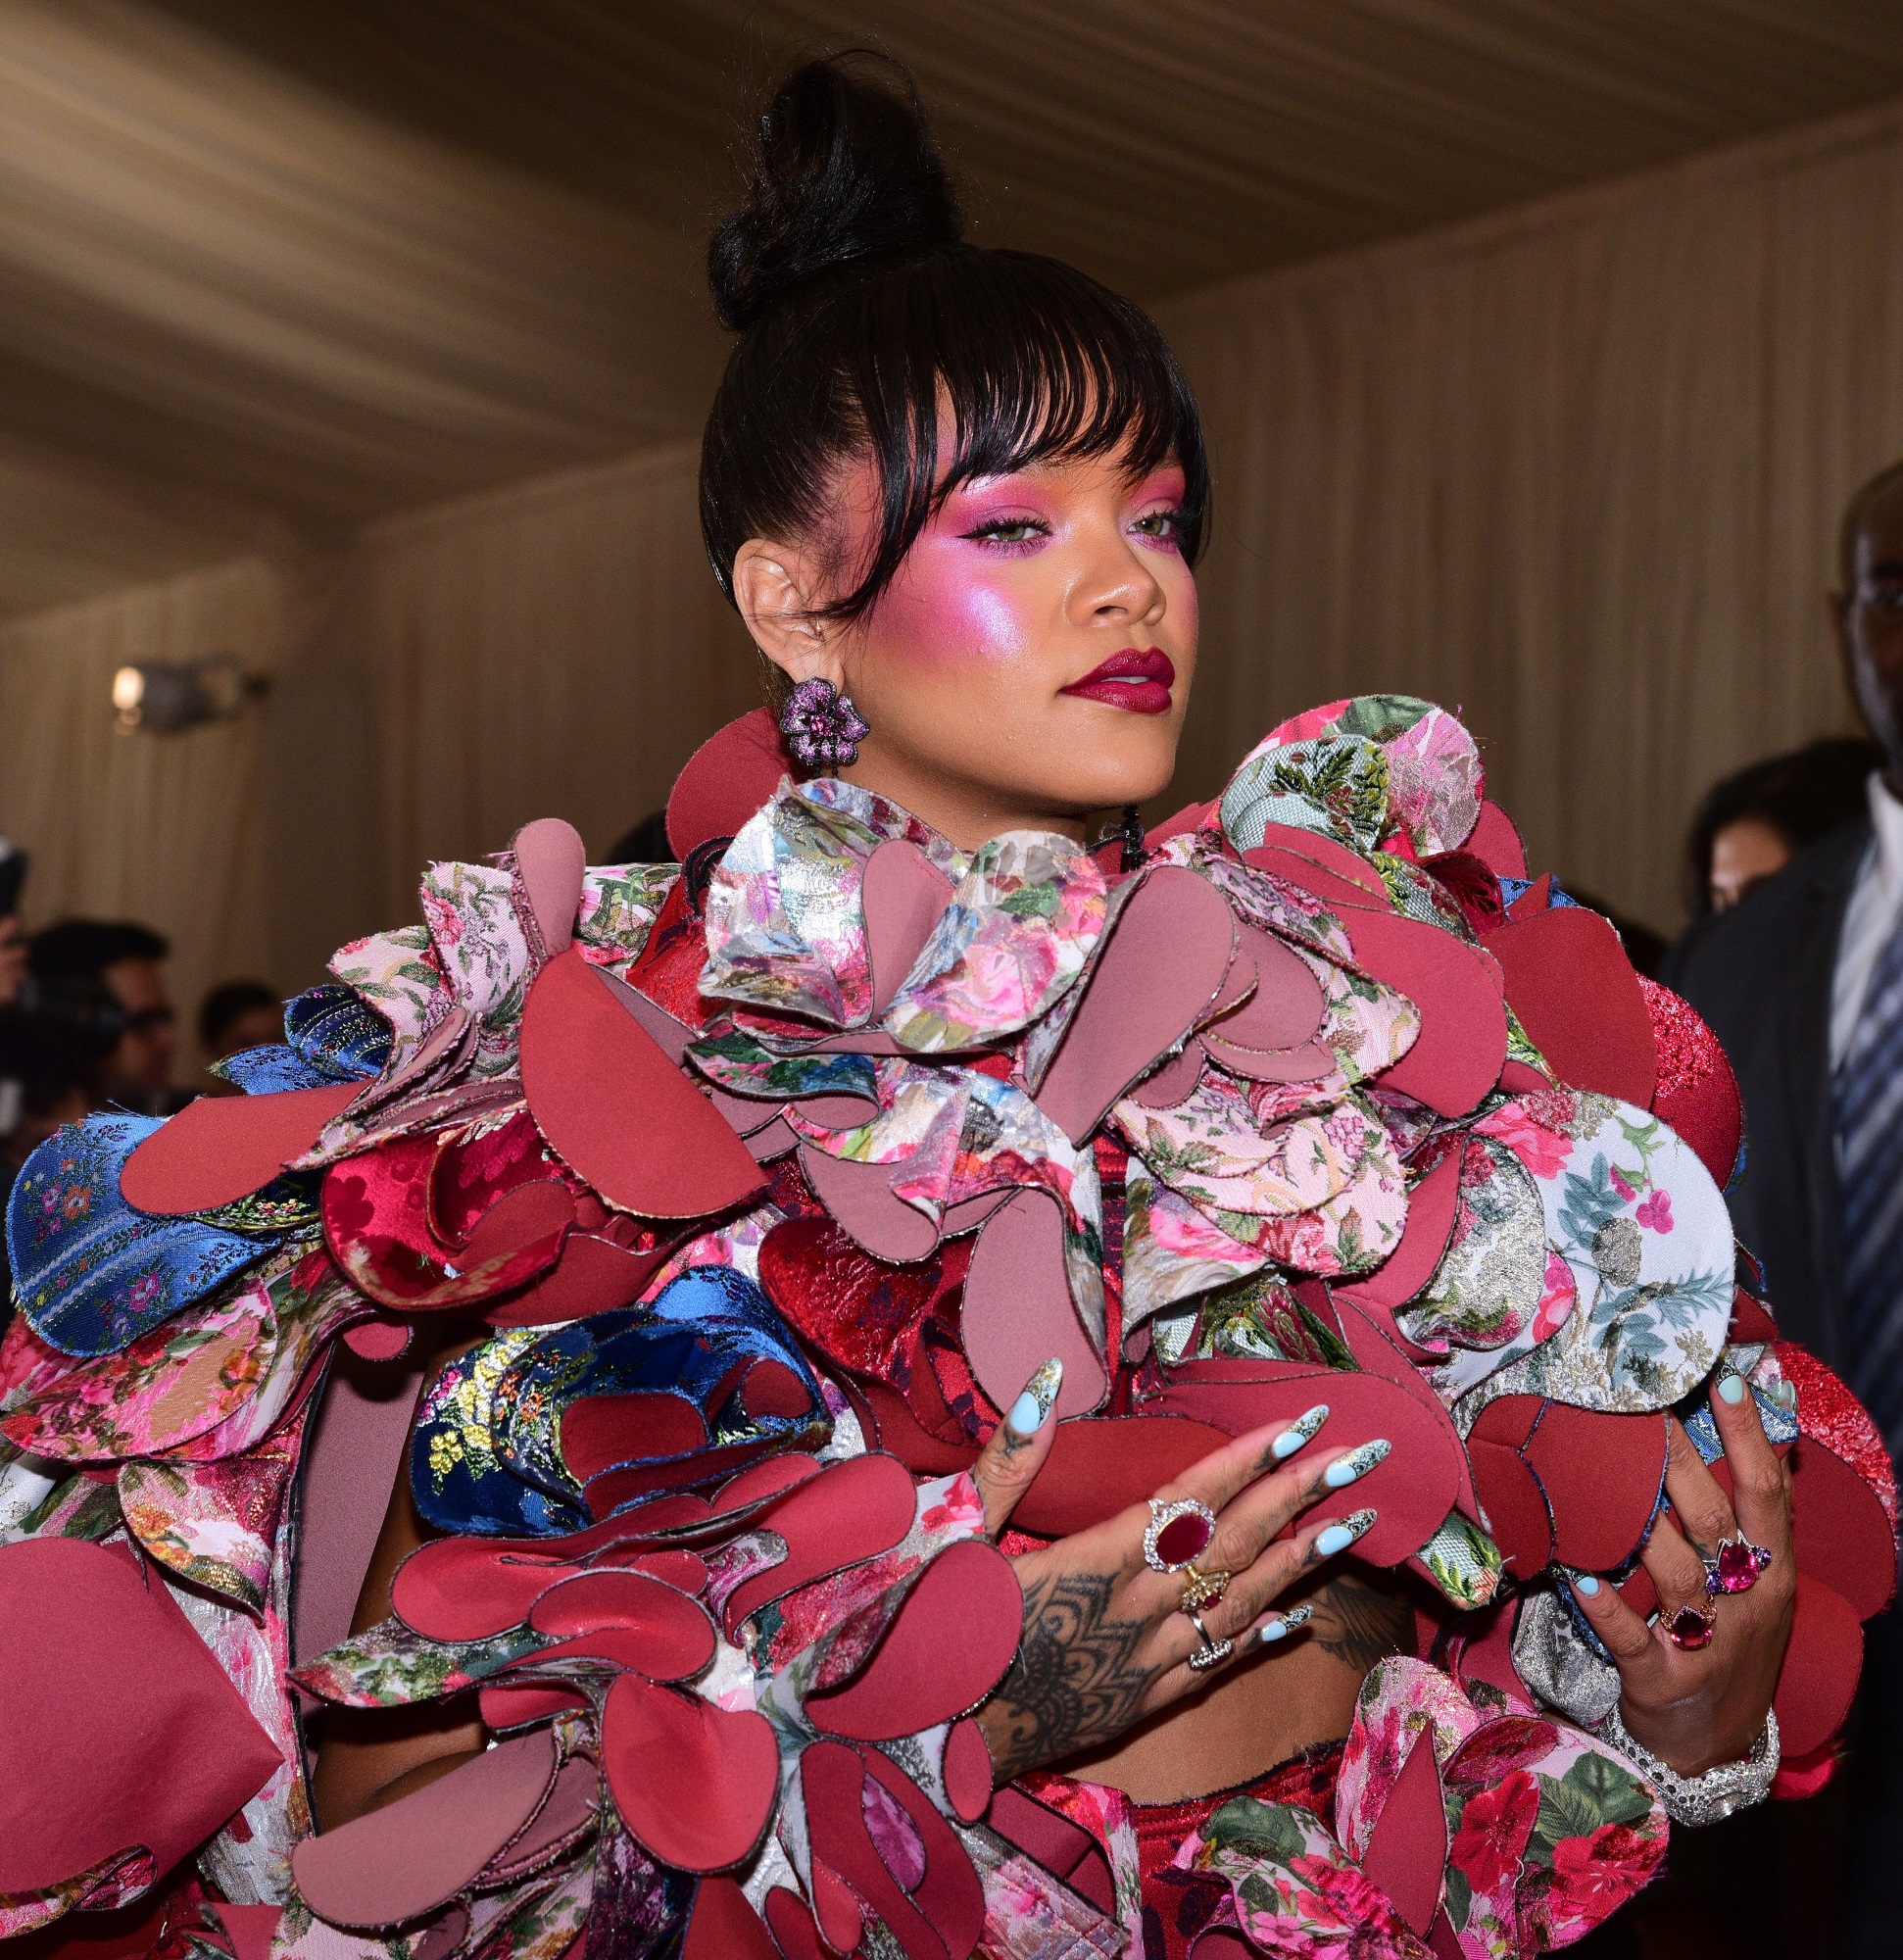 Rihanna
The Costume Institute Benefit celebrating the opening of Rei Kawakubo/Comme des Garcons: Art of the In-Between, Arrivals, The Metropolitan Museum of Art, New York, USA - 01 May 2017, Image: 331769239, License: Rights-managed, Restrictions: , Model Release: no, Credit line: Rose/Variety / Shutterstock Editorial / Profimedia